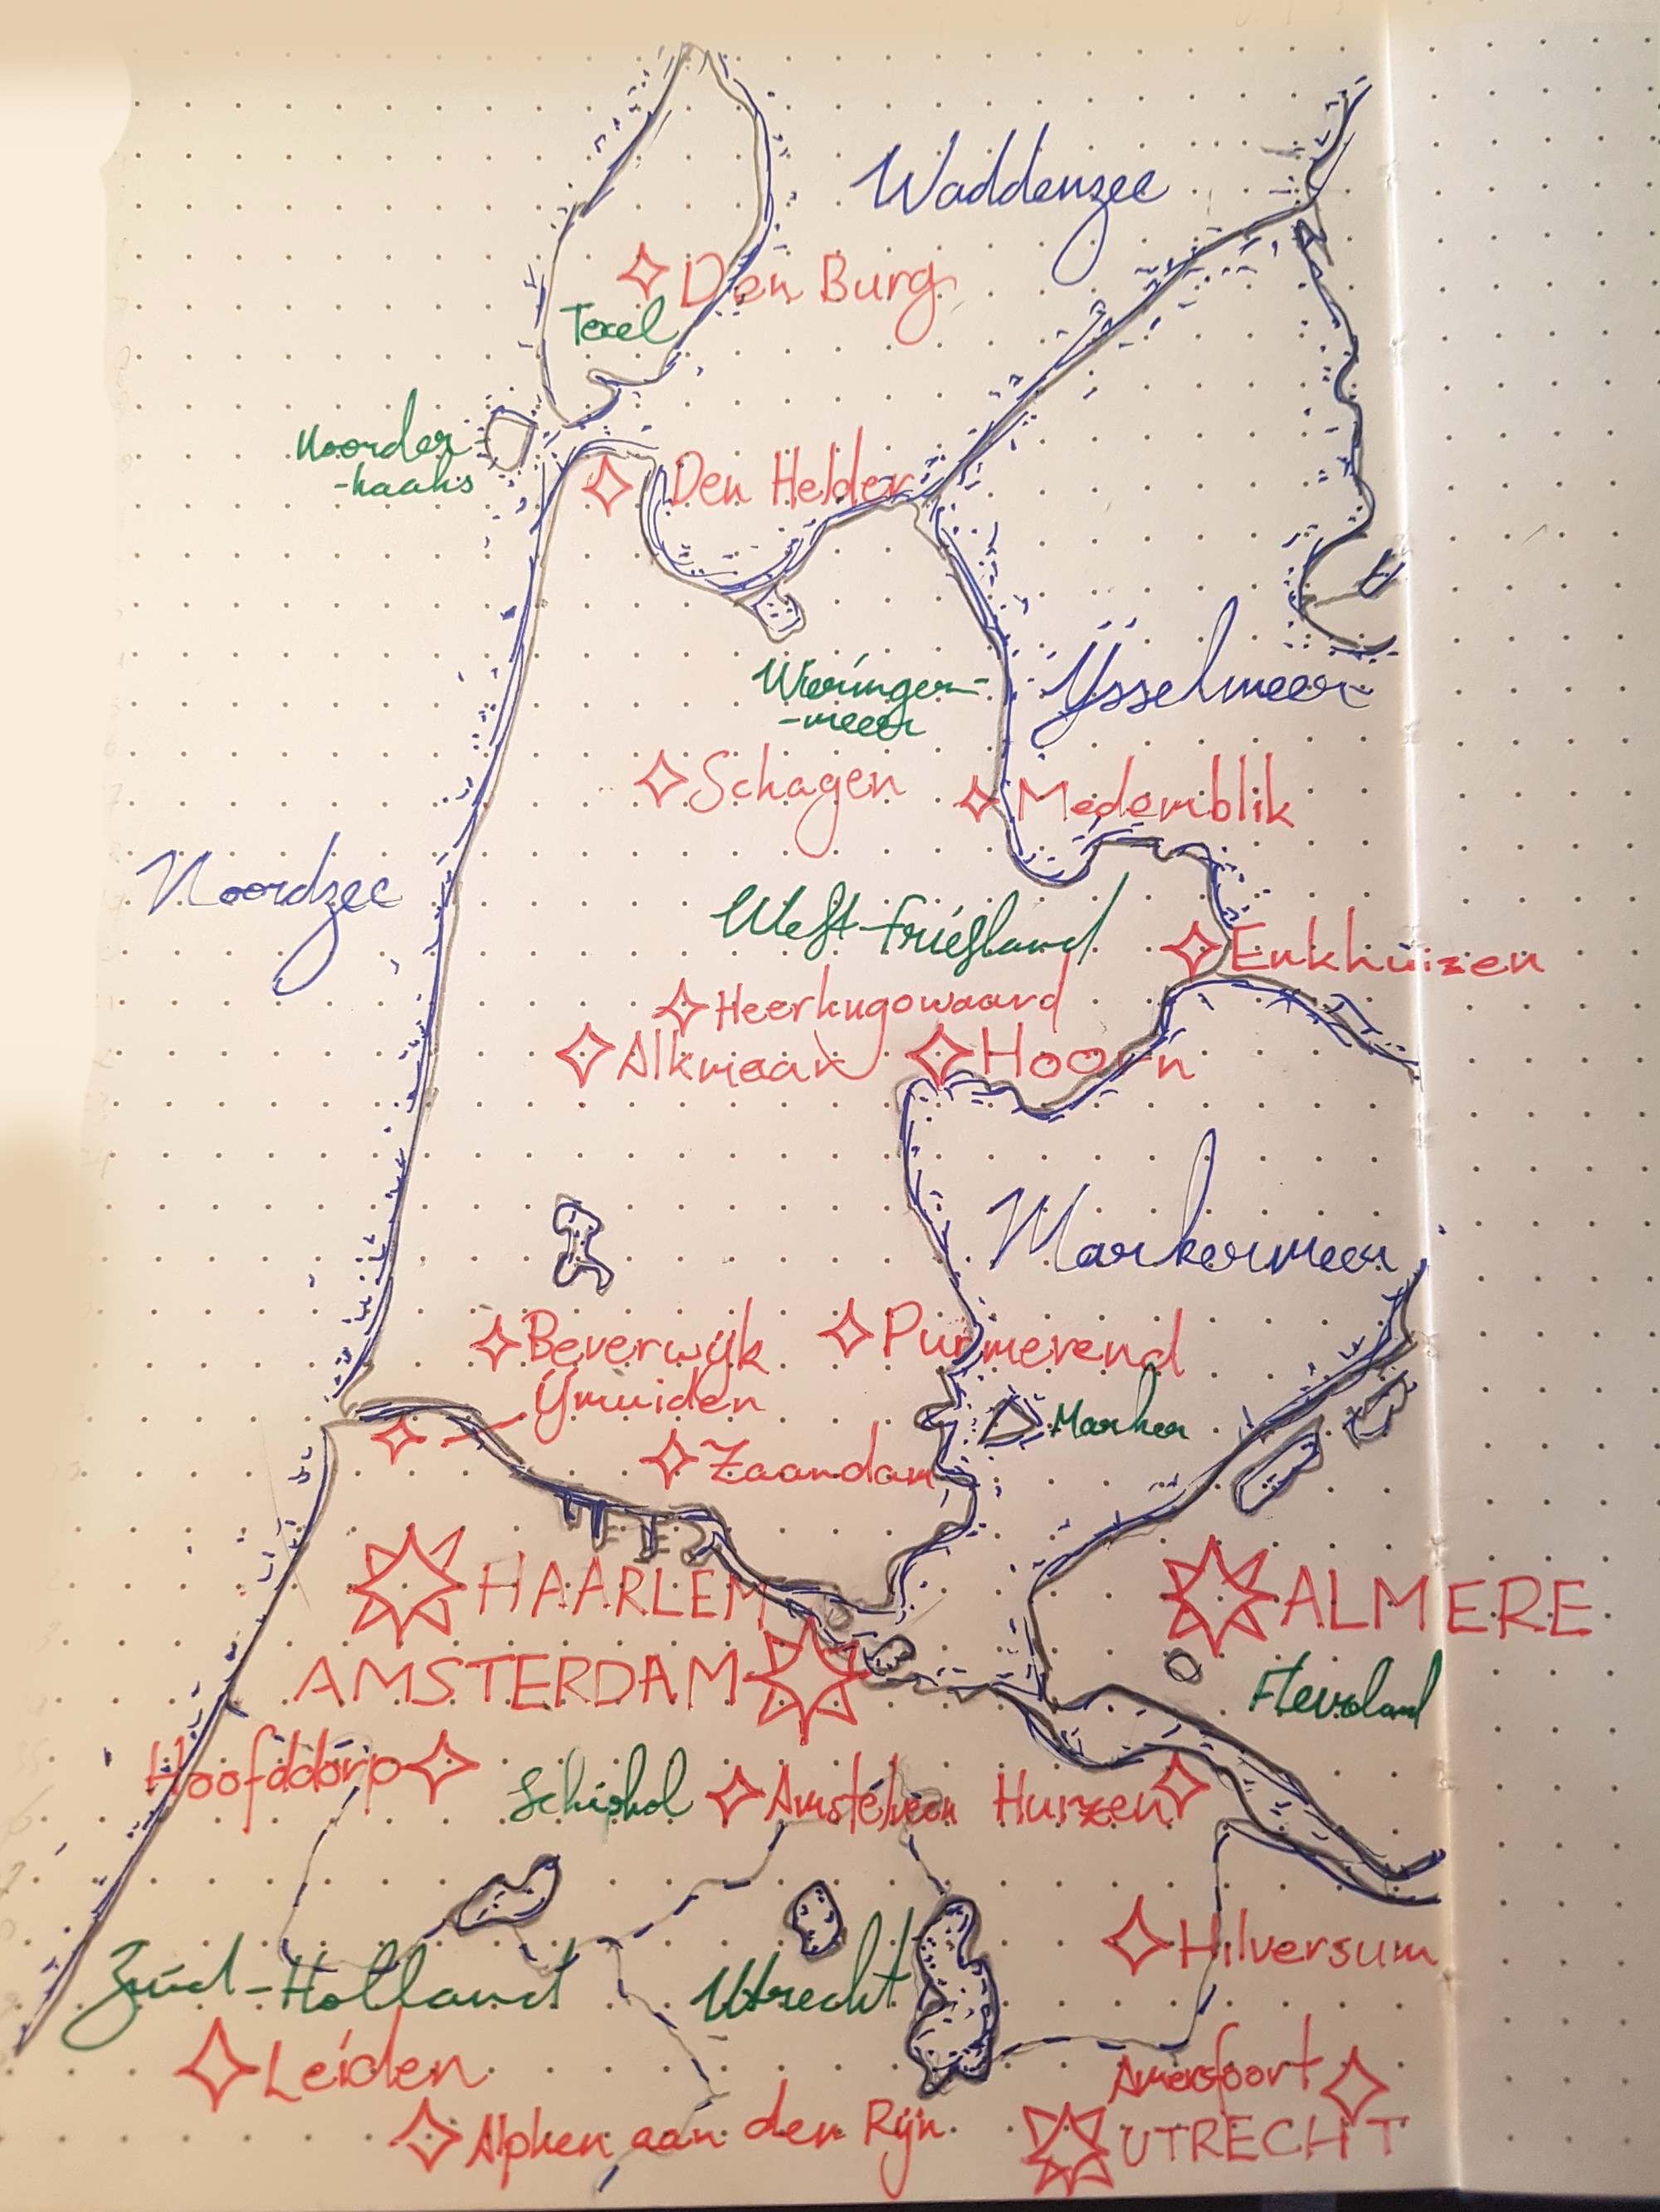 A map of North Holland and surrounding provinces doodled on some dotted paper.